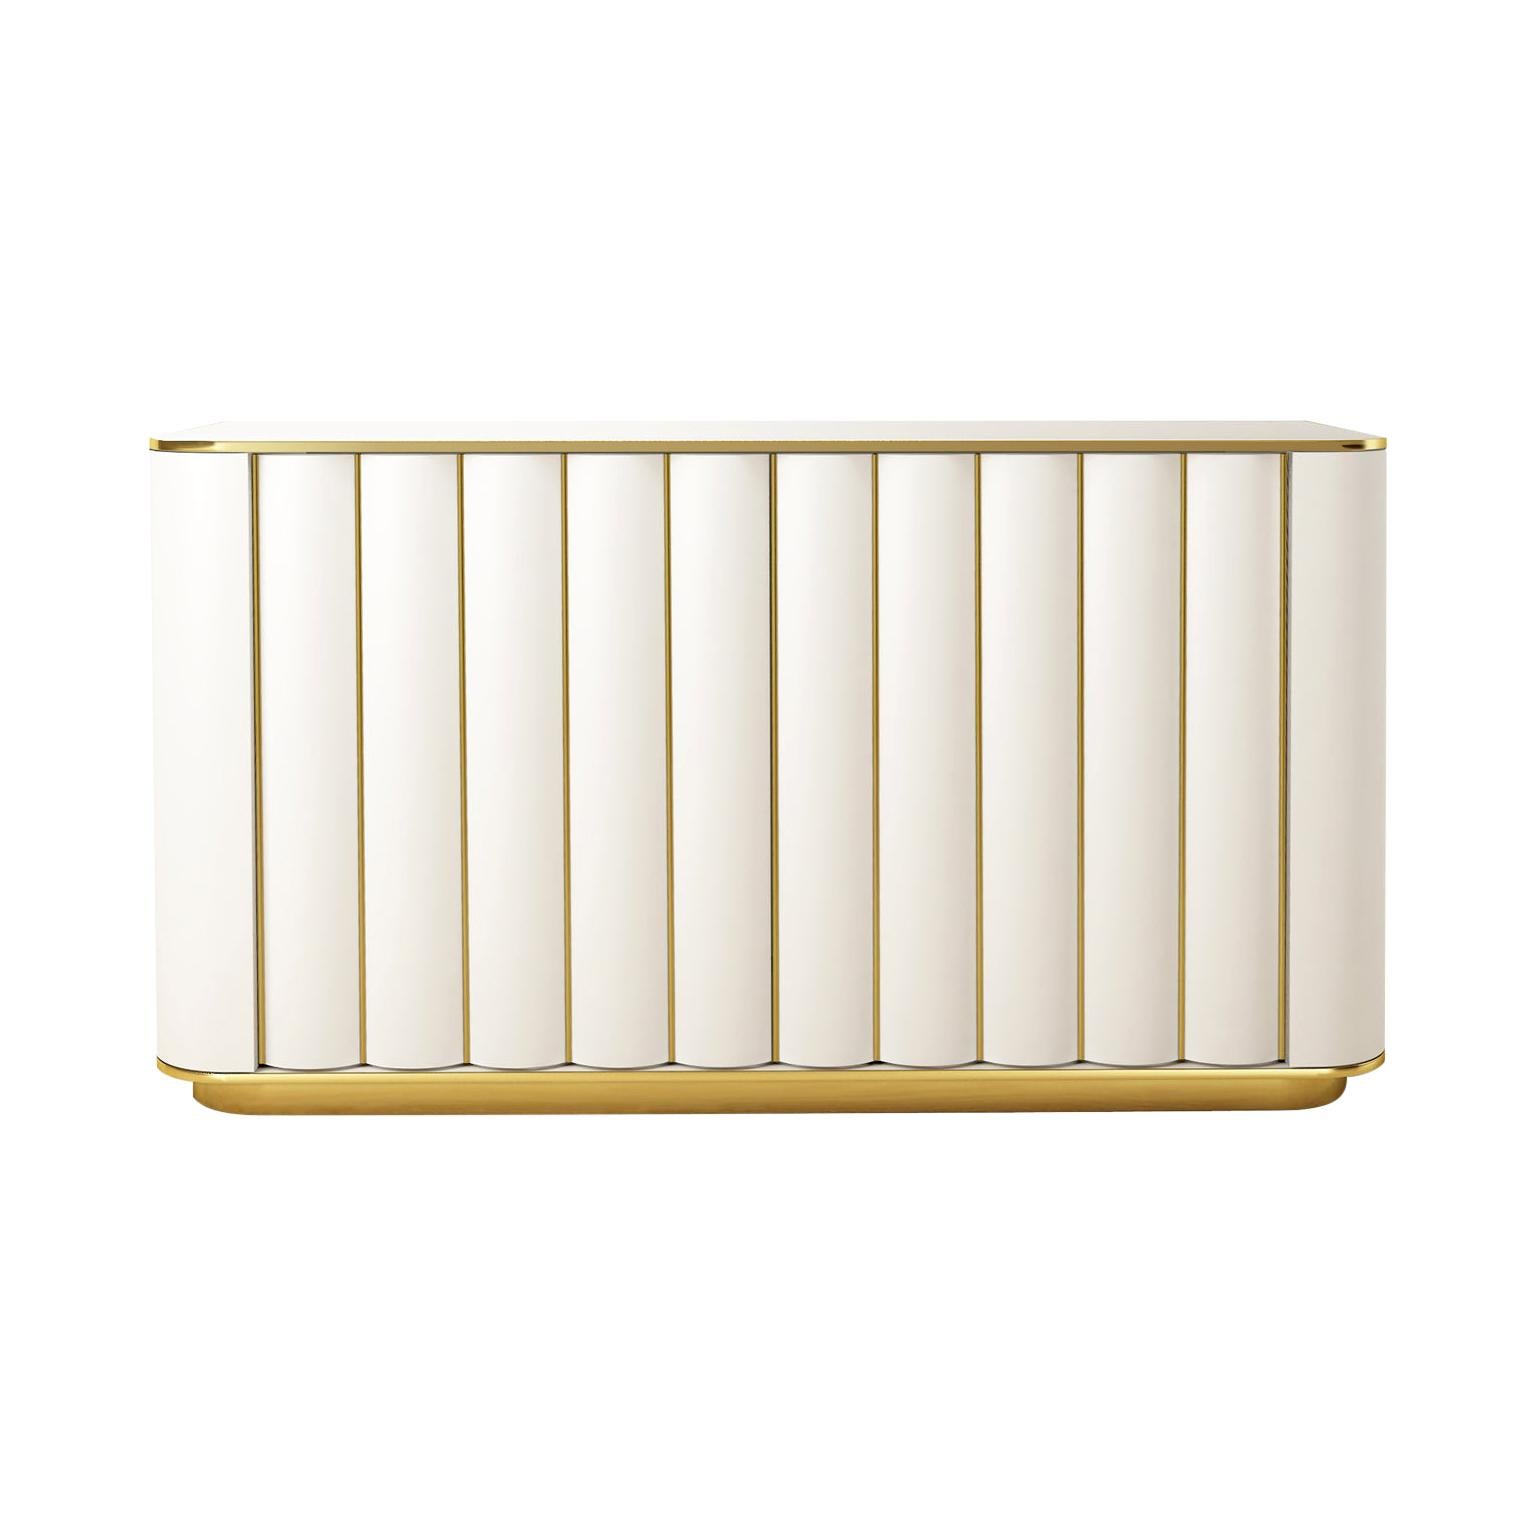 Isabella Costantini, Italy, Duilio Dresser with Polished Brass